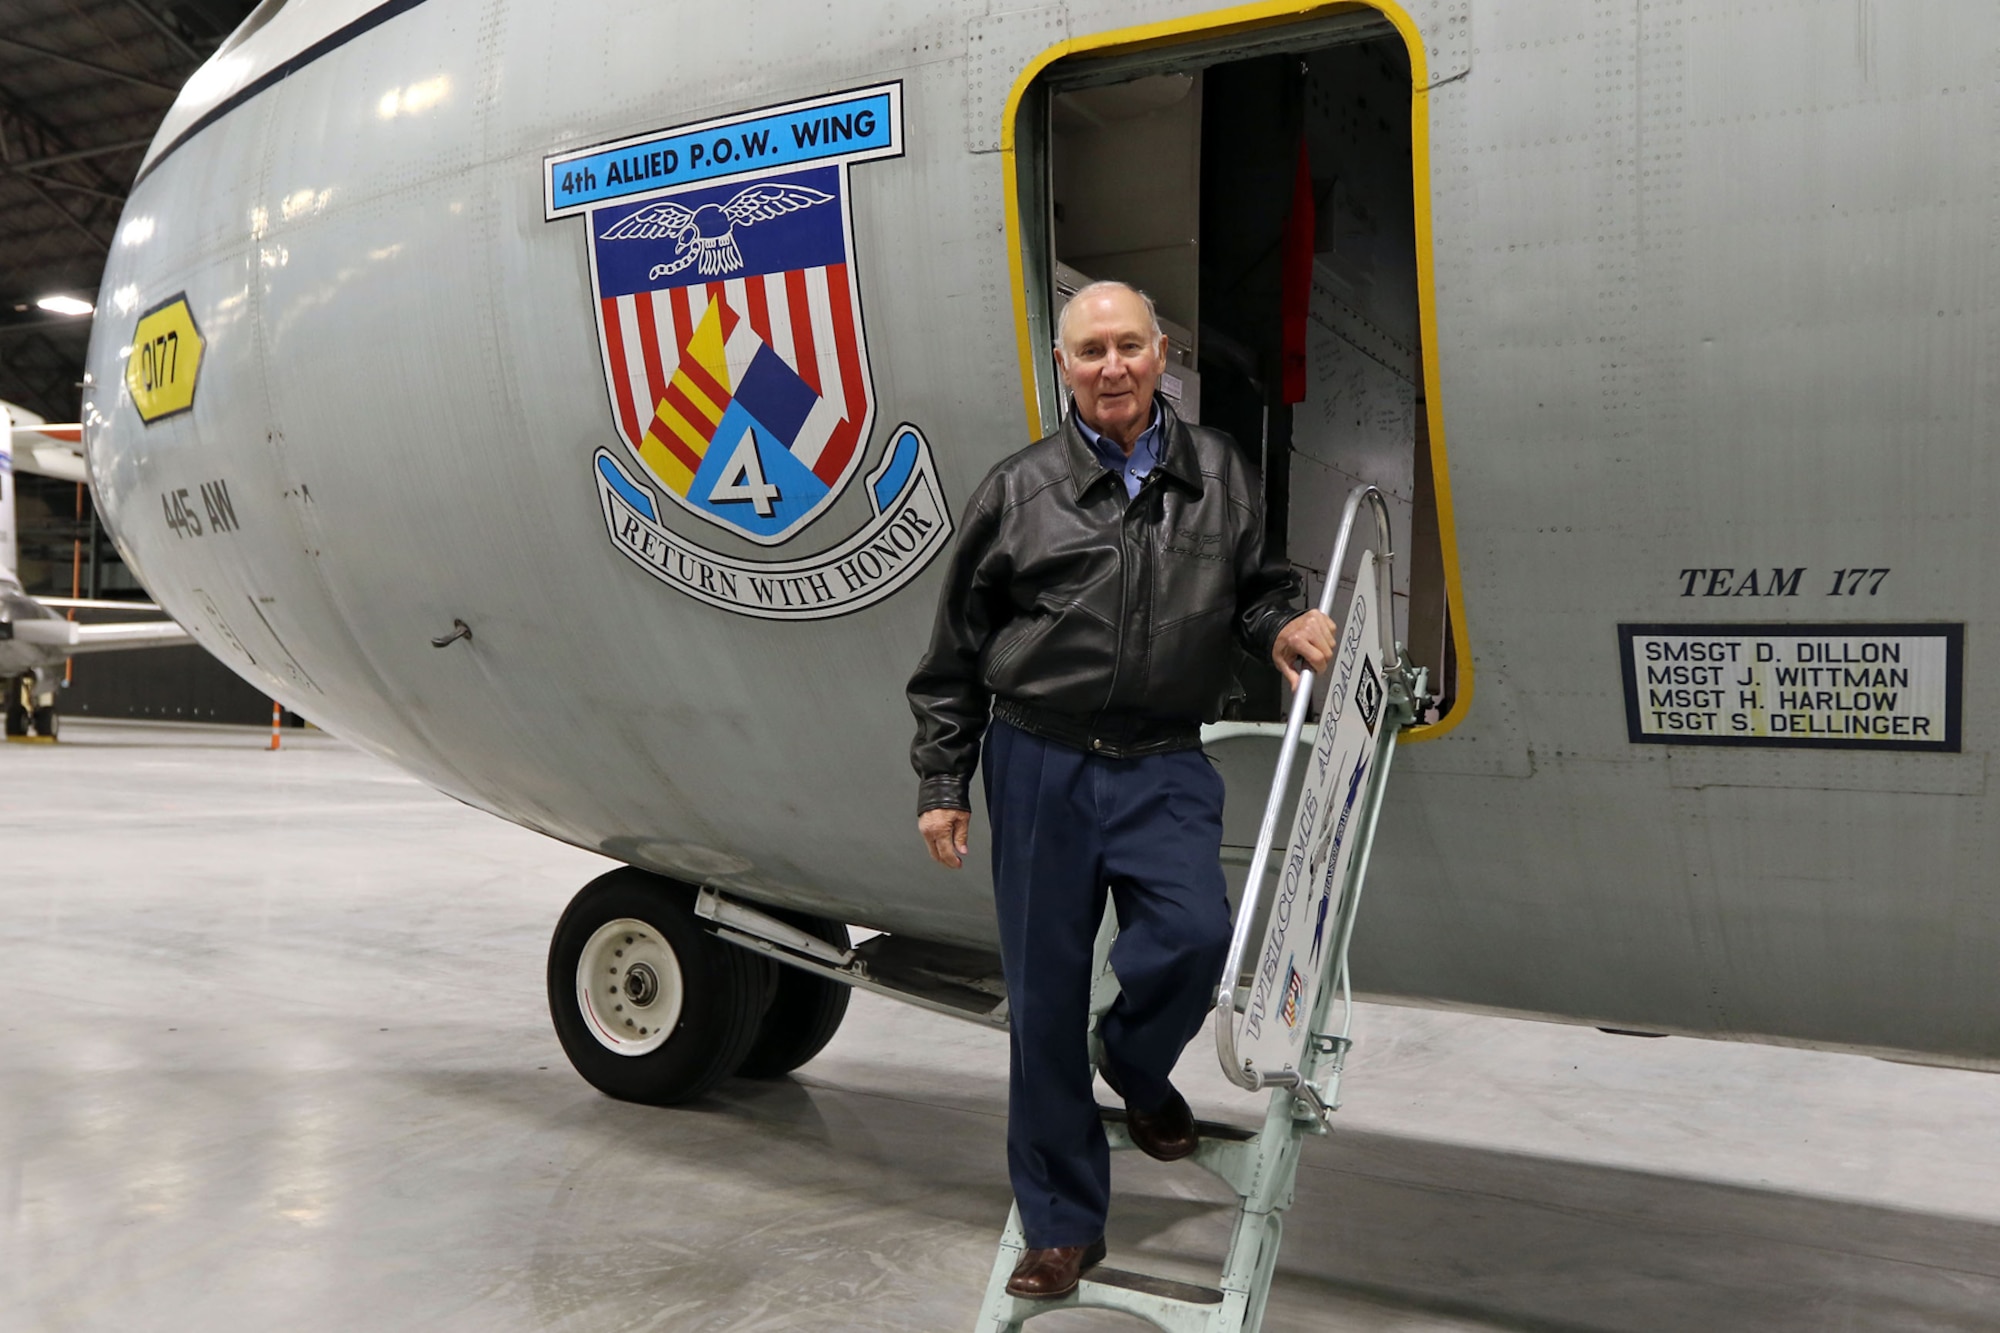 Lt. Col. (Ret.) Paul Kari, a former prisoner of war in Vietnam, poses with the Lockheed C-141C Hanoi Taxi in the new fourth building at the National Museum of the U.S. Air Force on Dec. 16, 2015. Kari was flown to freedom on the Hanoi Taxi in 1973. (U.S. Air Force photo by Don Popp)